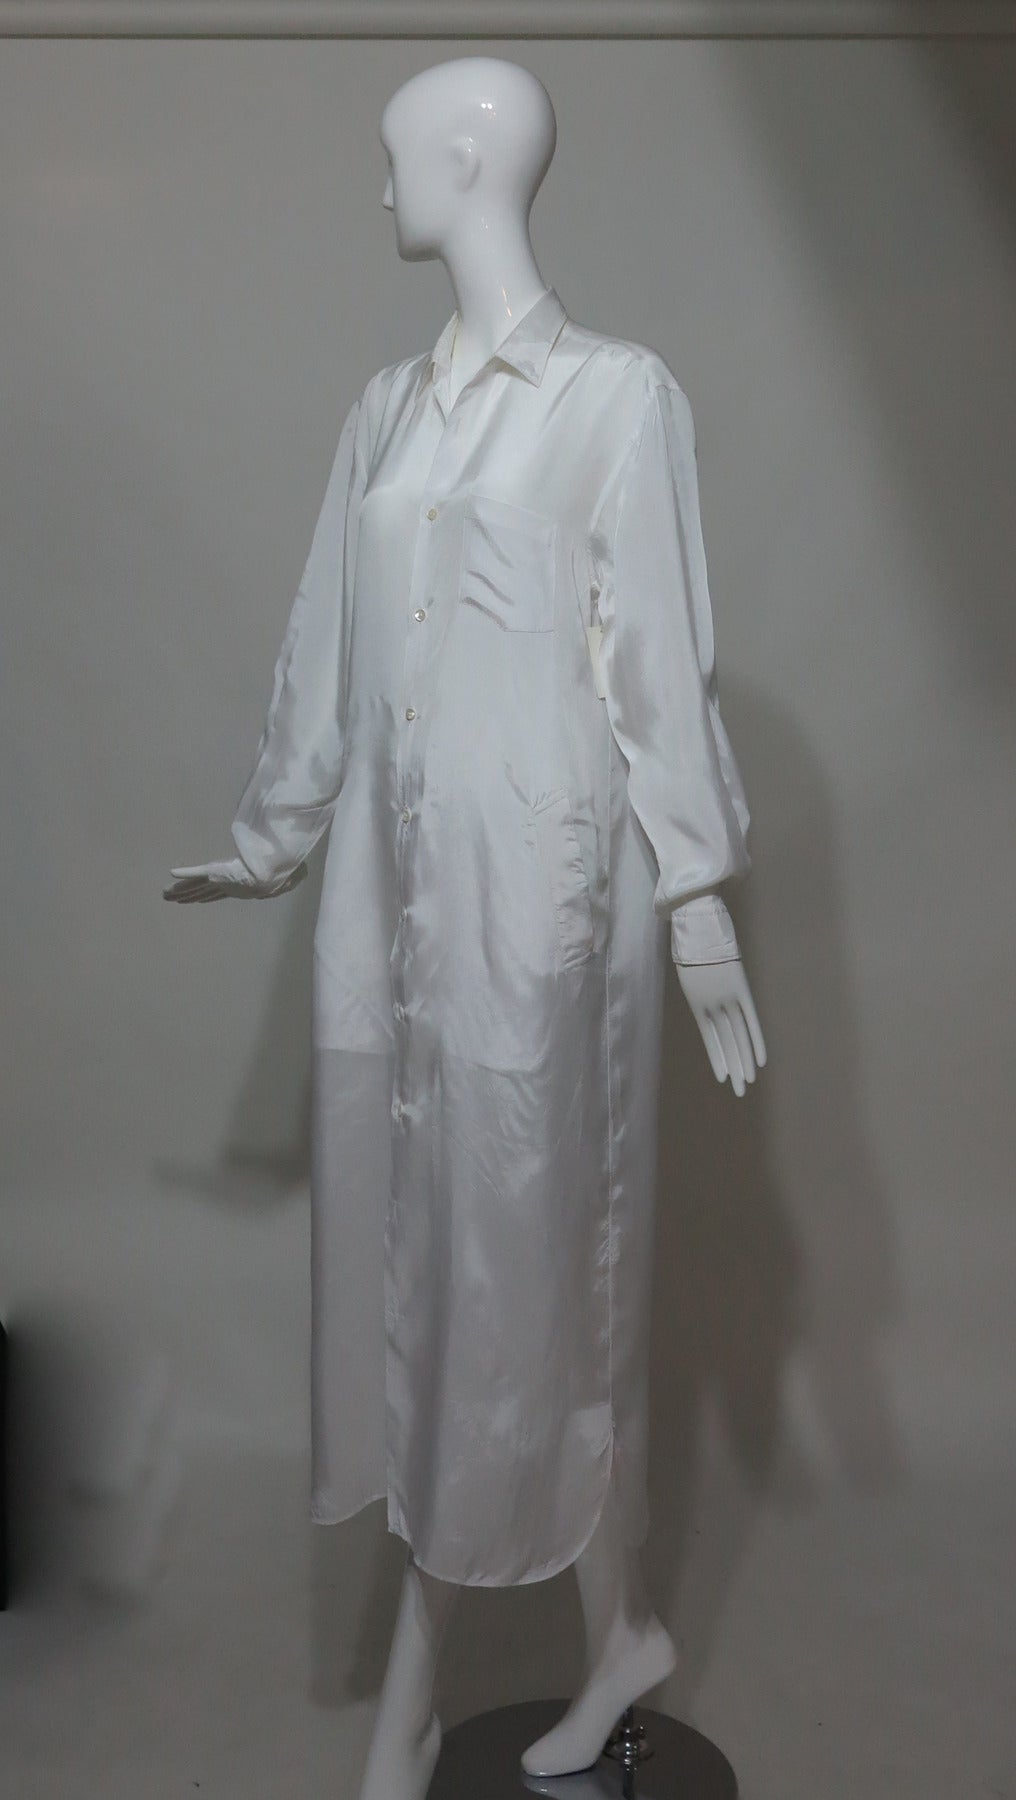 Comme des Garcons sheer white (feels like) nylon button front coat 1990s...Long sleeve coat buttons at the front and at the banded cuffs, single chest pocket and angled banded hip pockets, shirttail hem...Unlined...Fits like a S-M

Please check